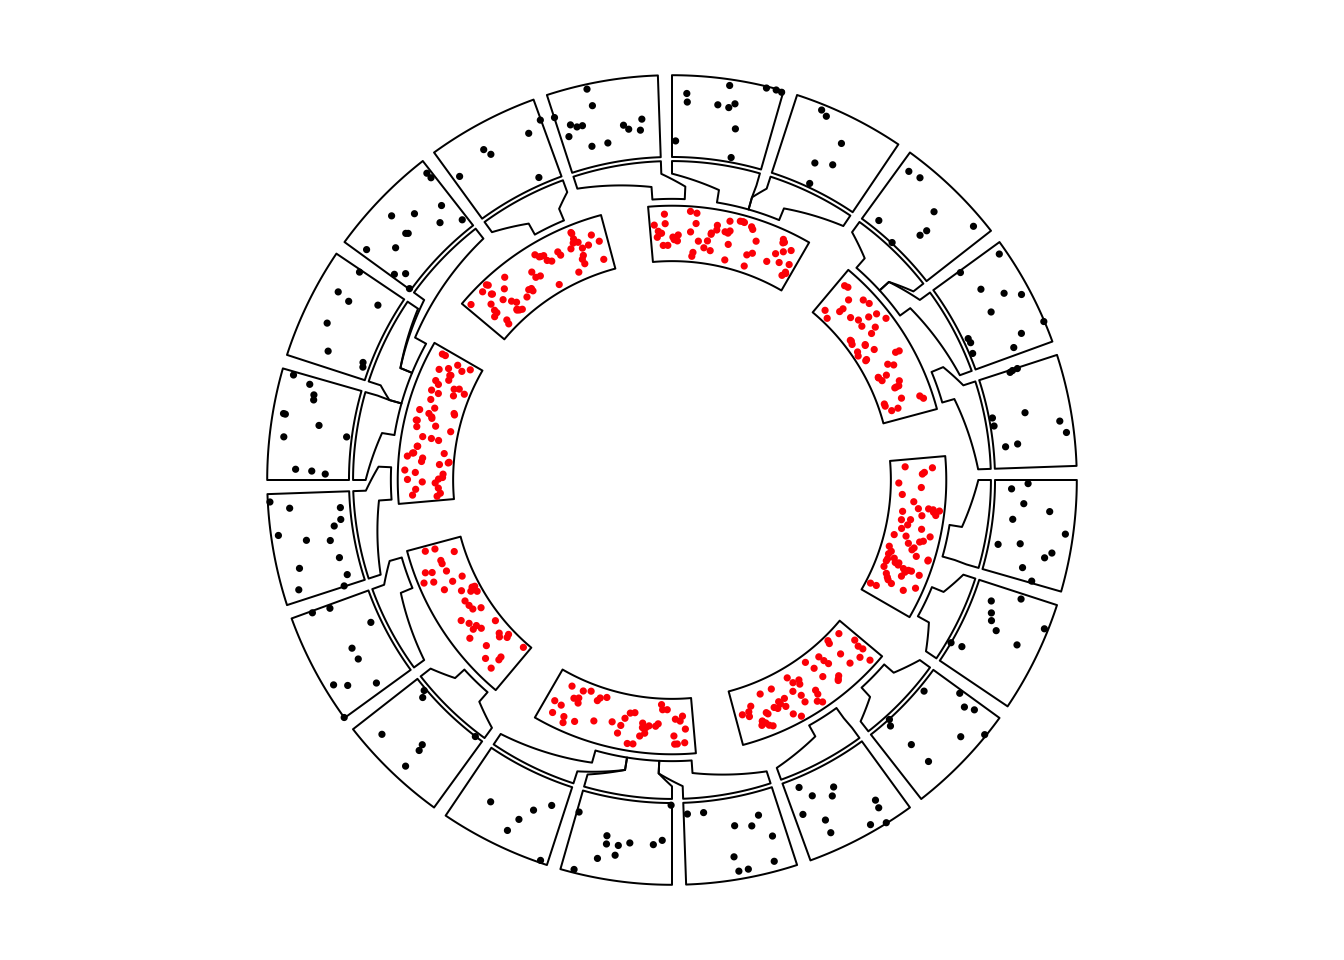 Nested zooming between two circular plots, zoomed plot is put outside.